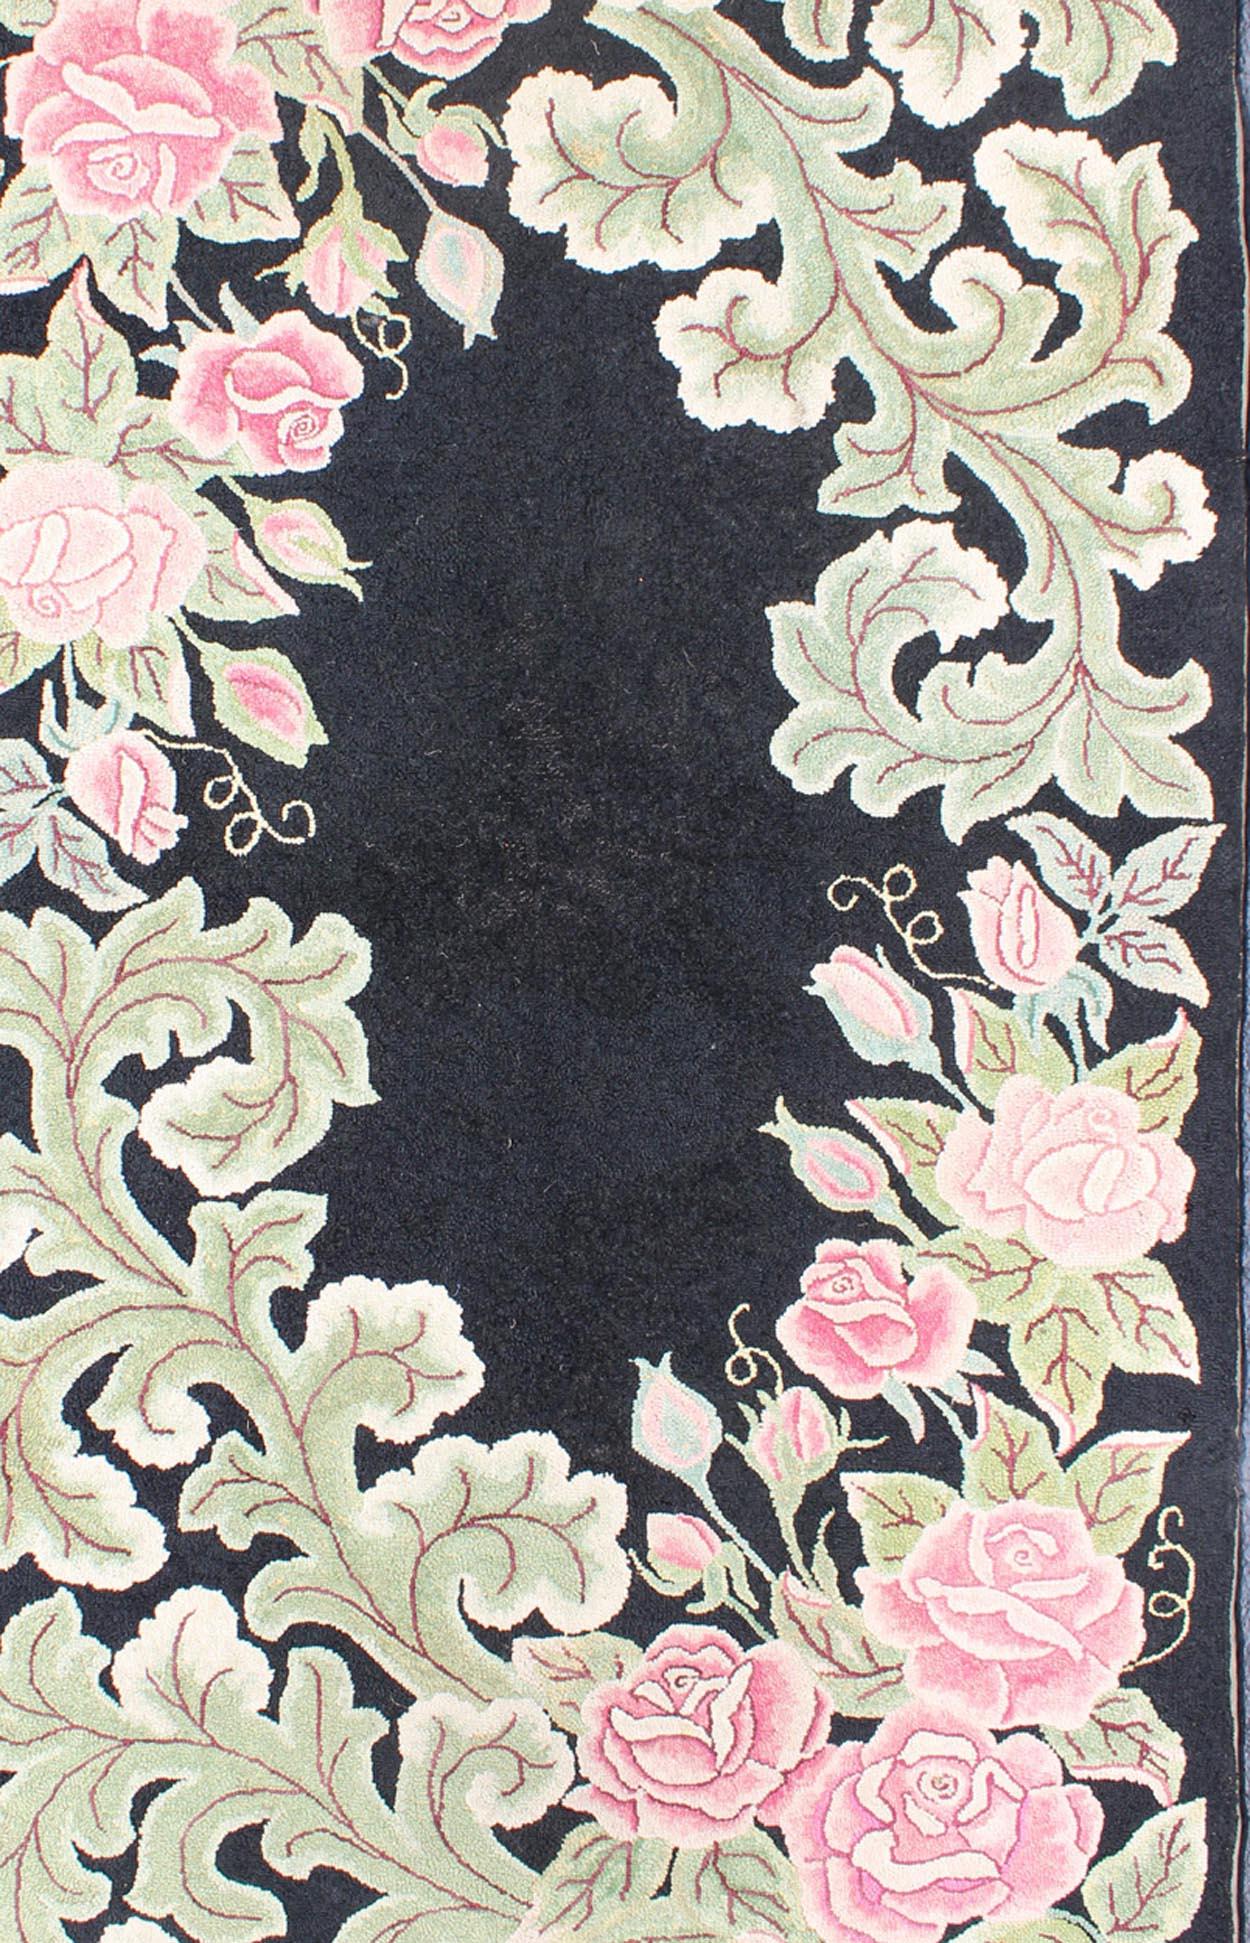 American hooked rug in black background. This beautiful antique American Hook rug sets on black background with large floral medallion. American hooked rug , Keivan Woven Arts/rug/L11-0605, country of origin / type: United States / Hooked, circa